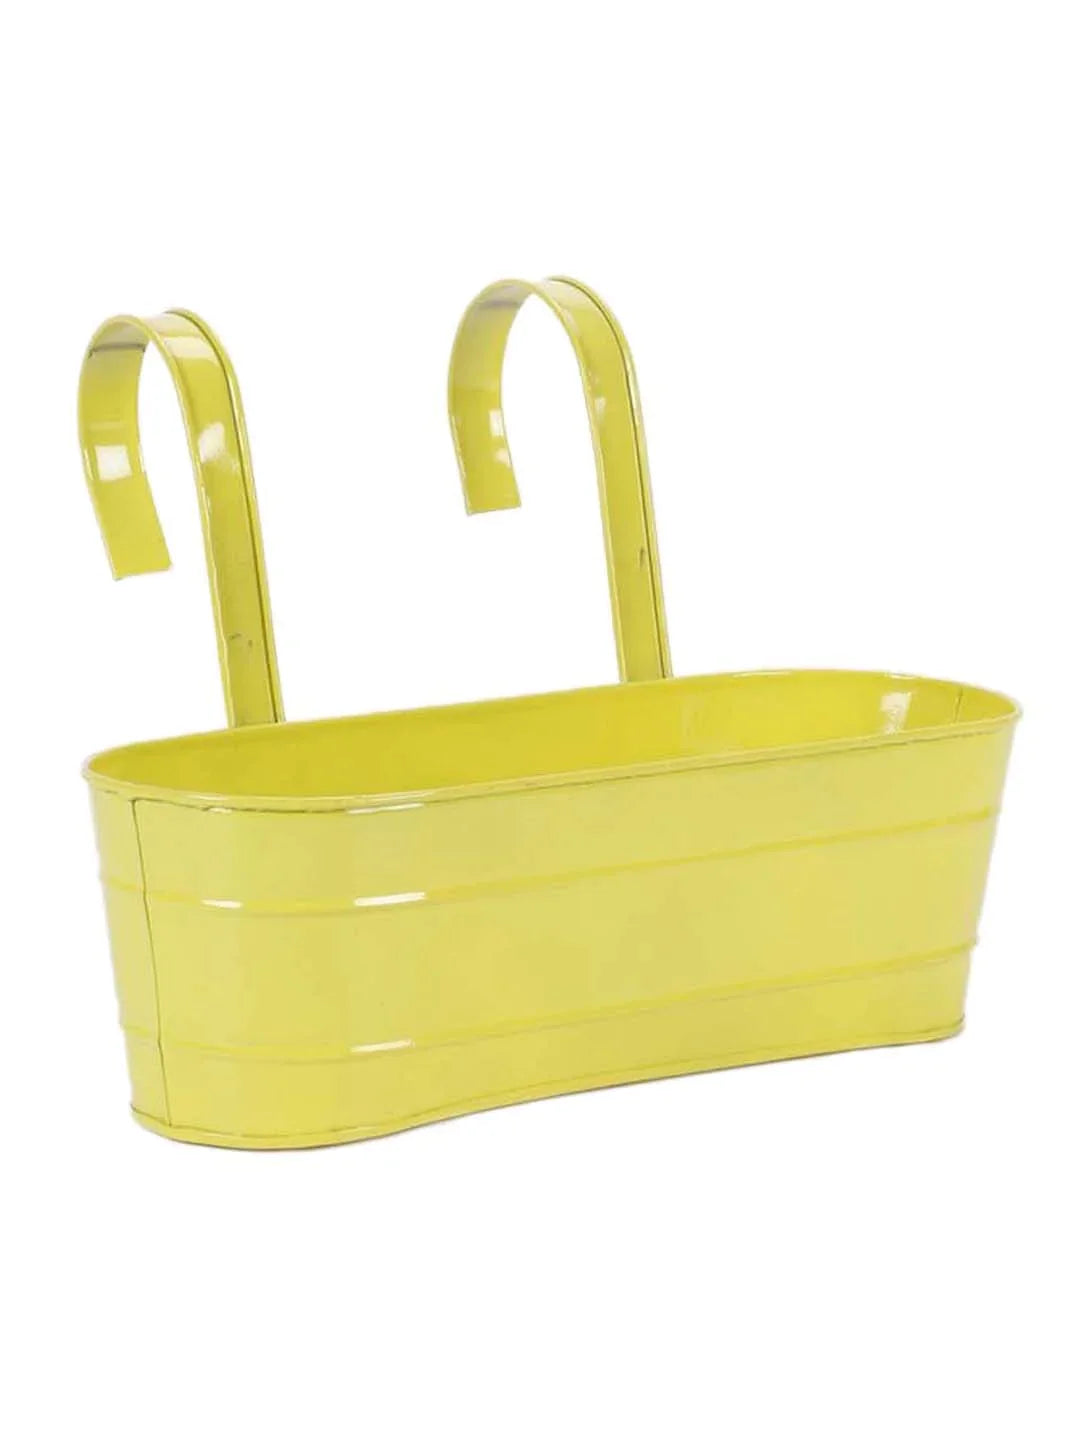 Oval Railing Planter Large Yellow  16 Inches 